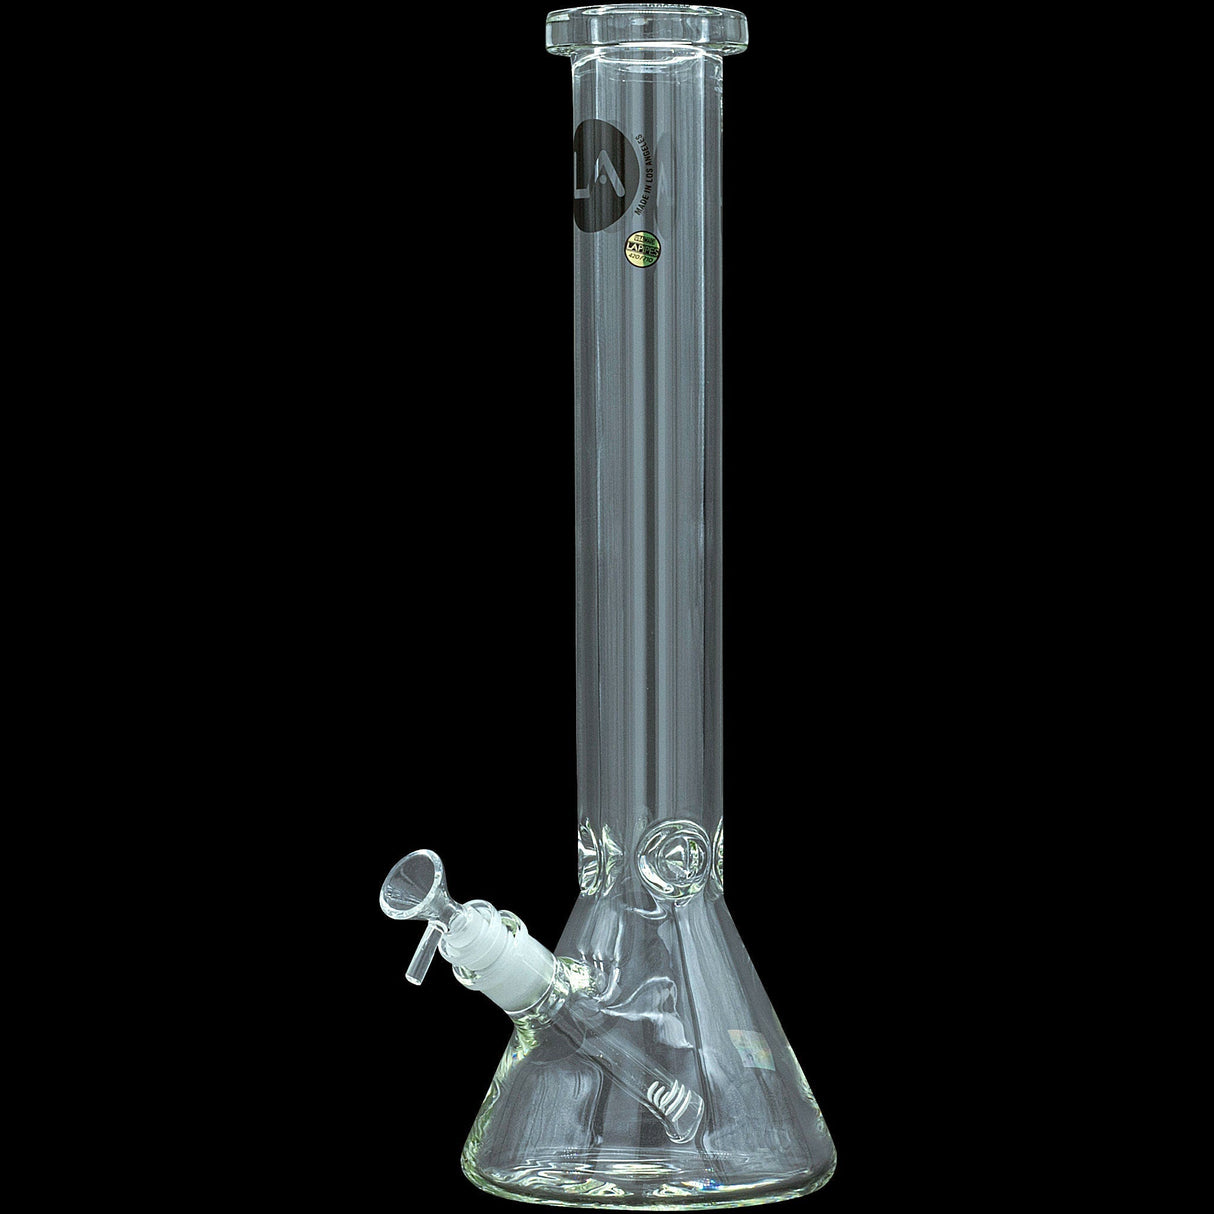 LA Pipes "Squared Up" Clear Beaker Bong, 9mm Thick Borosilicate Glass, Front View